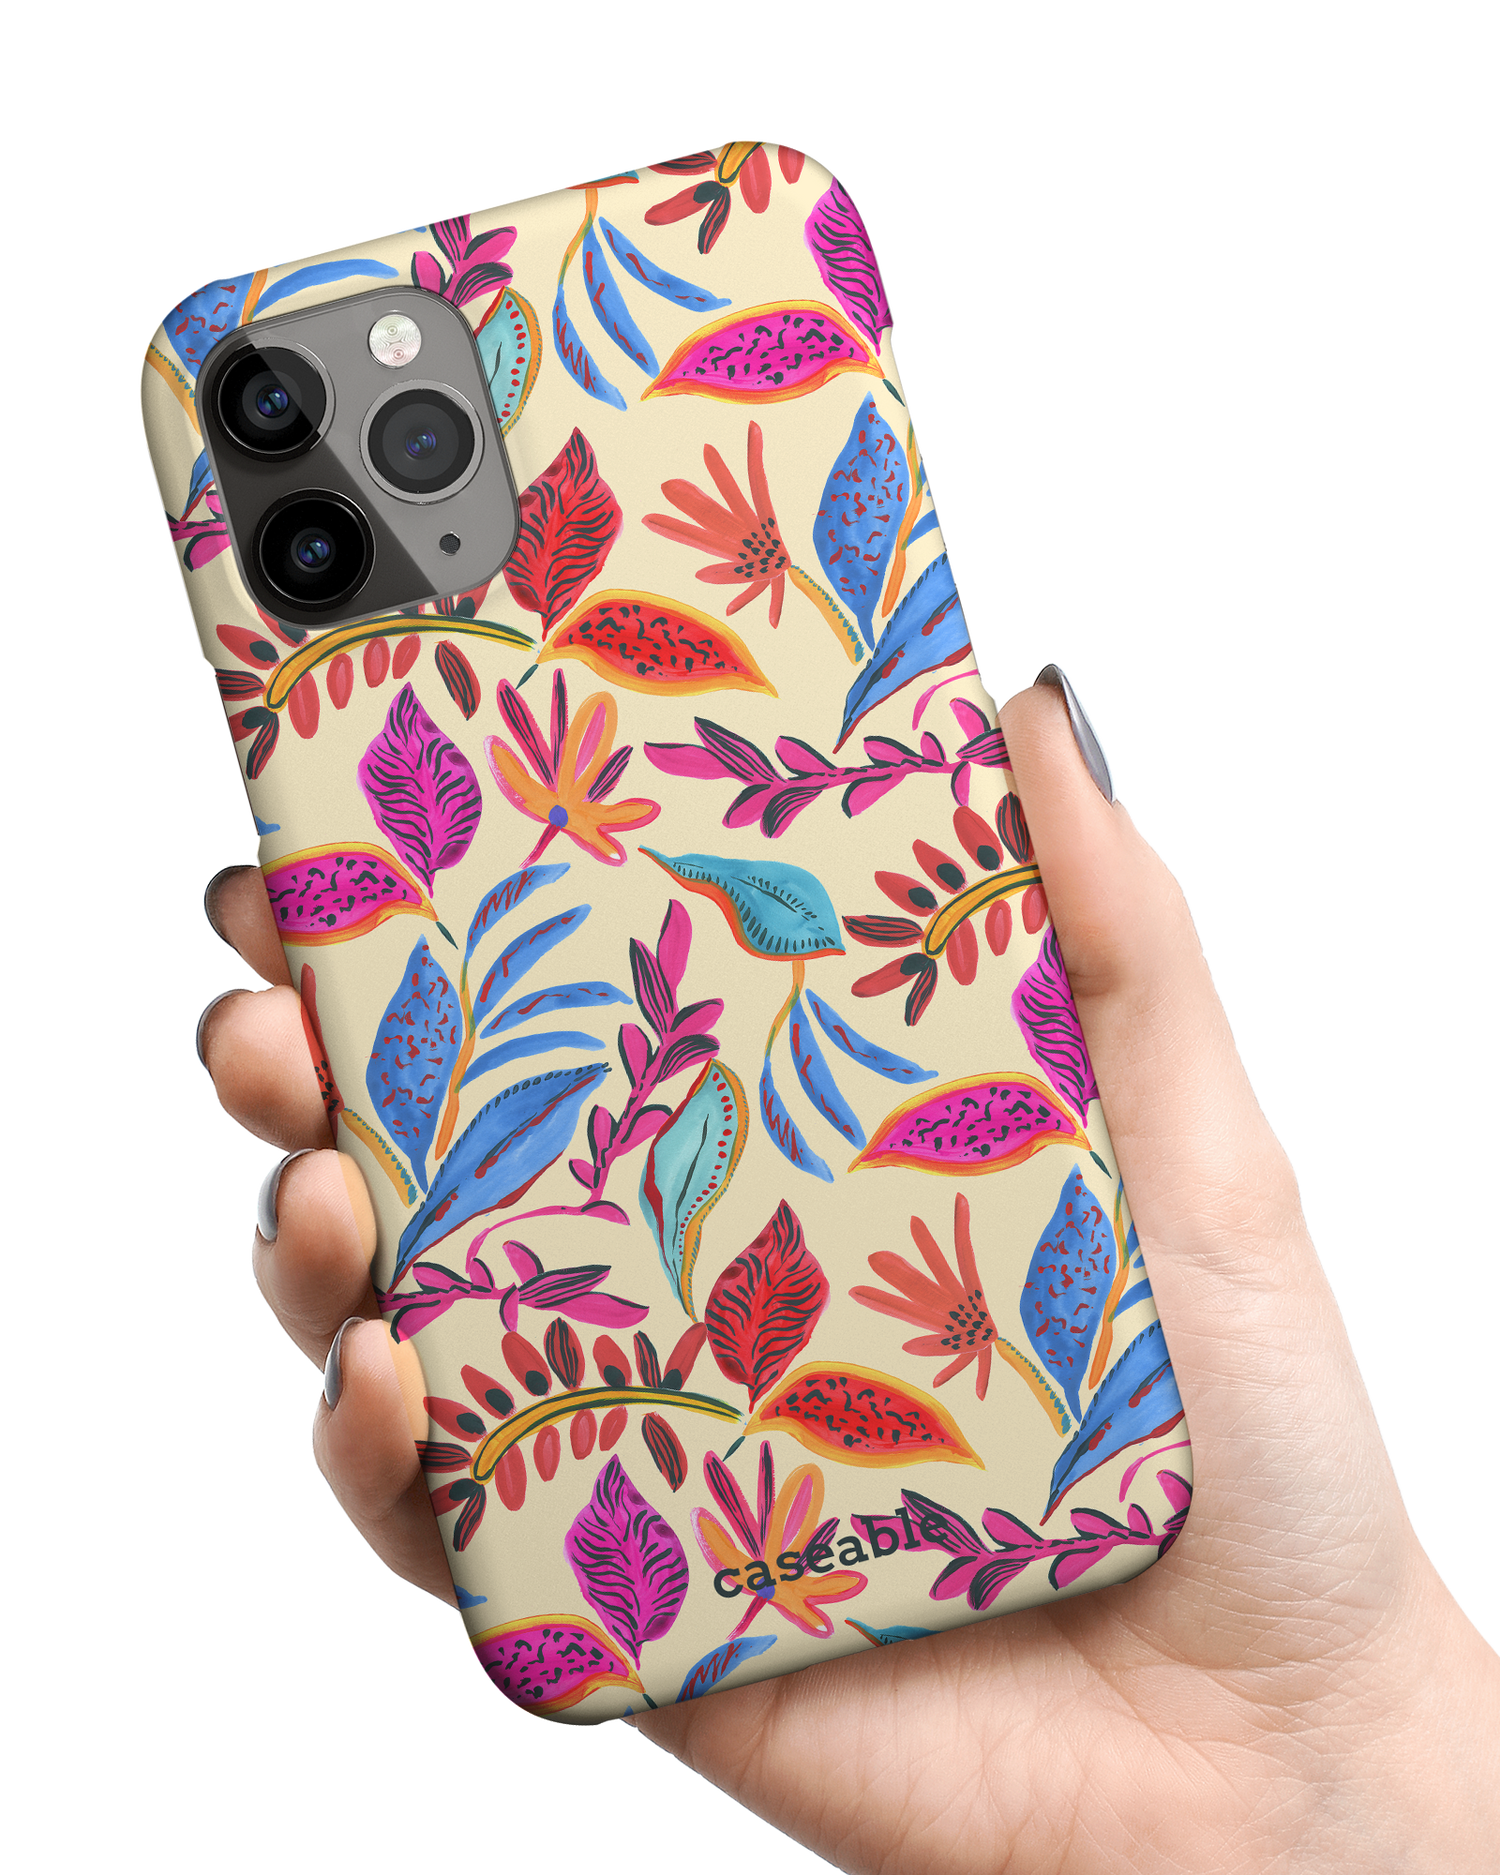 Painterly Spring Leaves Hard Shell Phone Case Apple iPhone 11 Pro Max held in hand